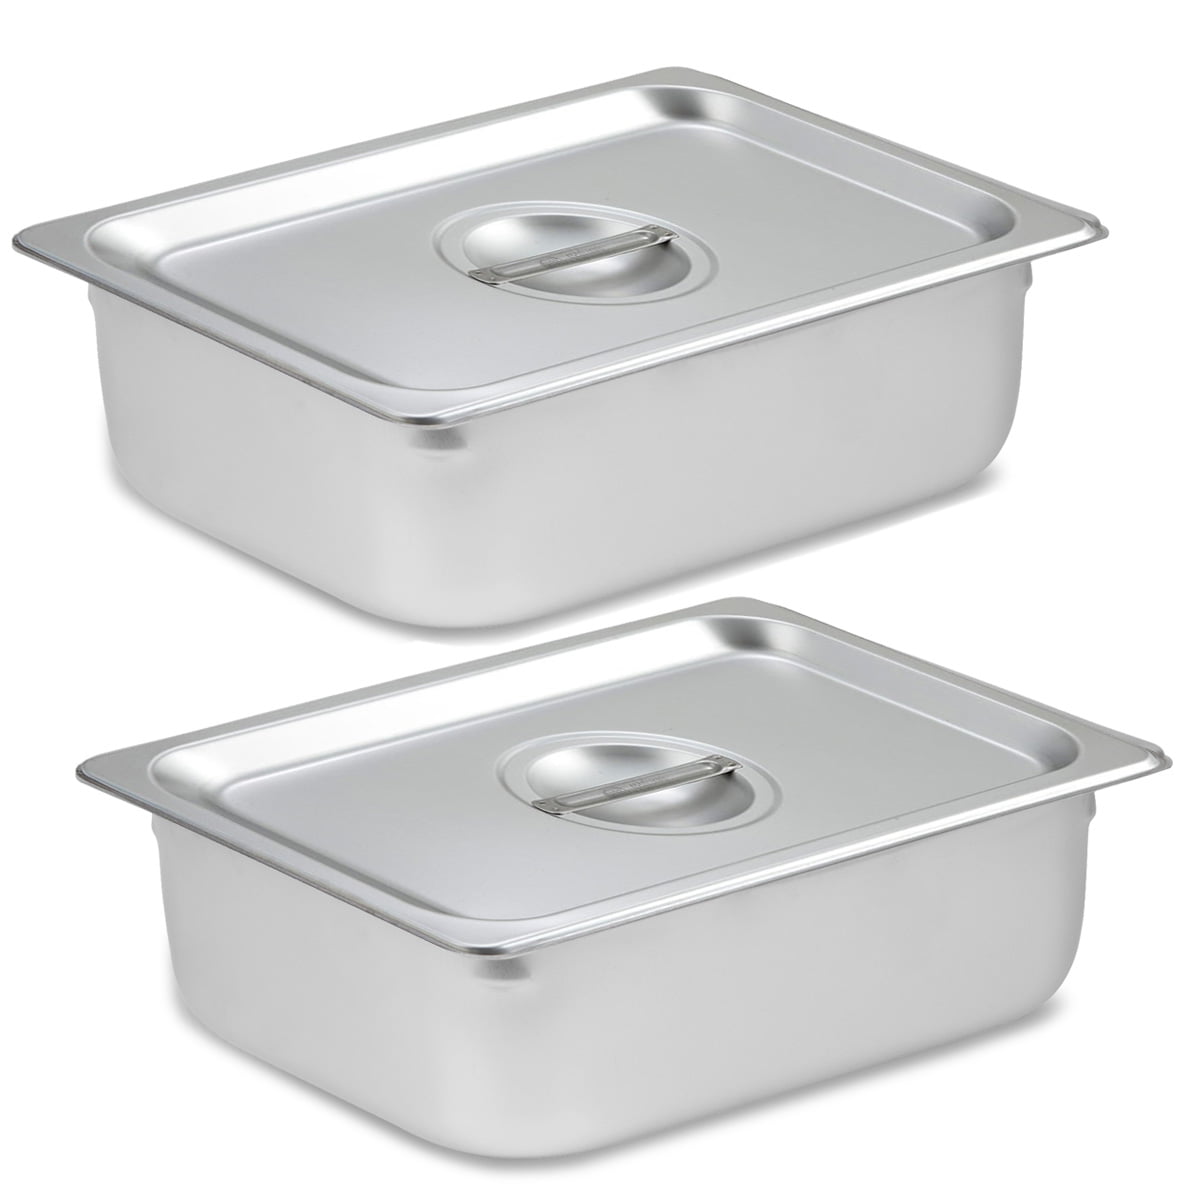 2 Pack Half Size Stainless Steel Steam Table Chafer Pans Hotels Restaurant Pan